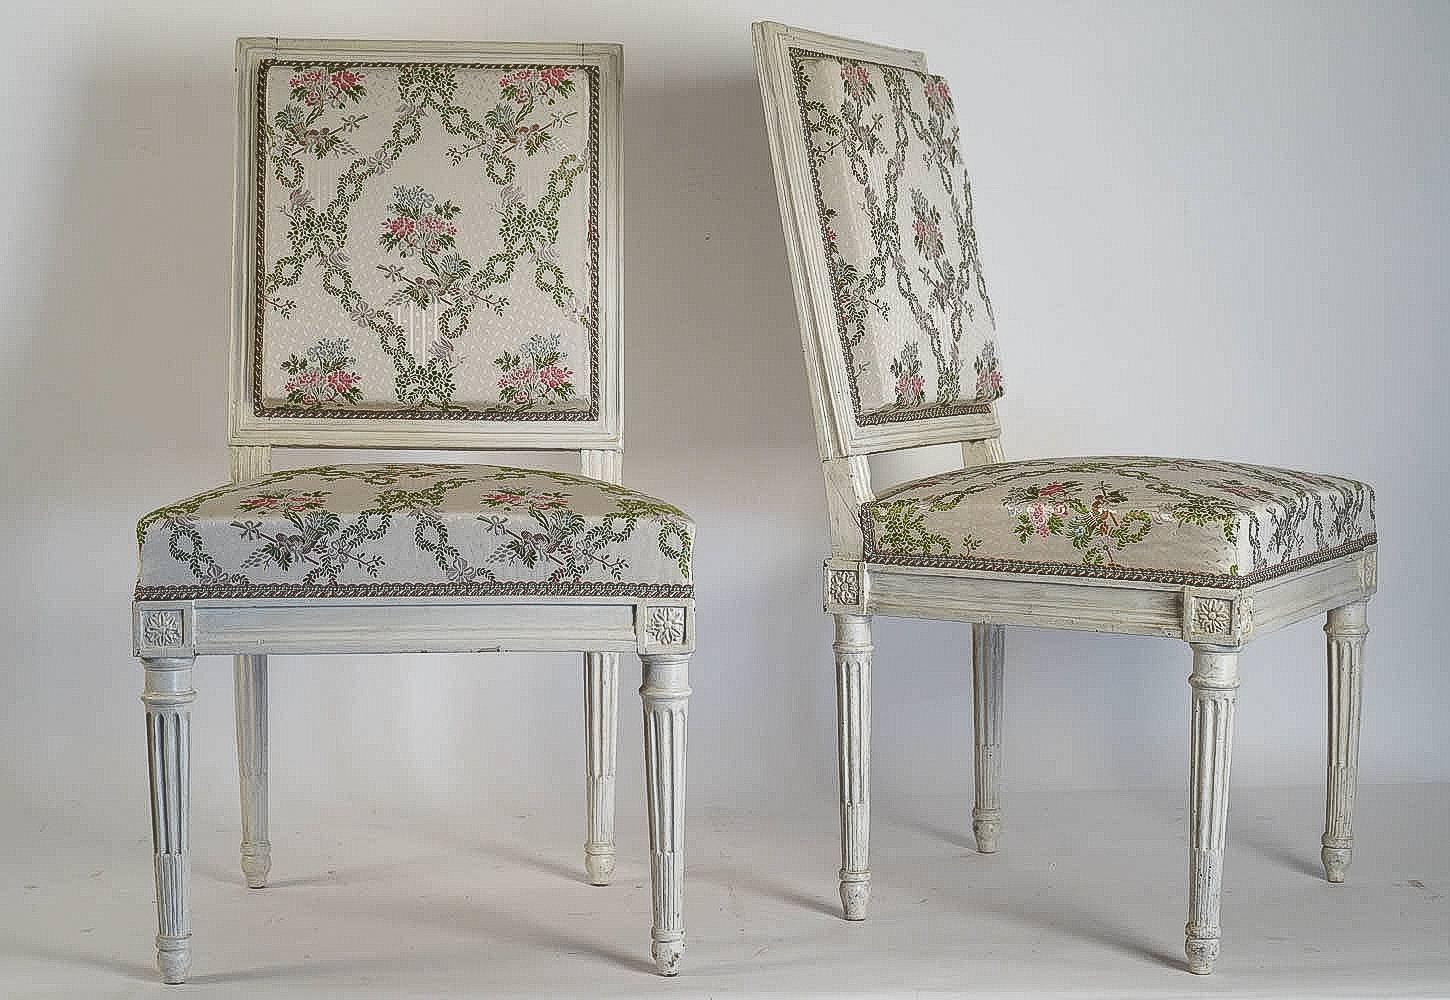 An elegant set of a pair of chairs in hand-carved and lacquered fruitwood in a classic Louis XVI style. Georges Jacob stamps our couple of chairs.

Our set is in excellent condition and there upholstered with a new beautiful floral silk